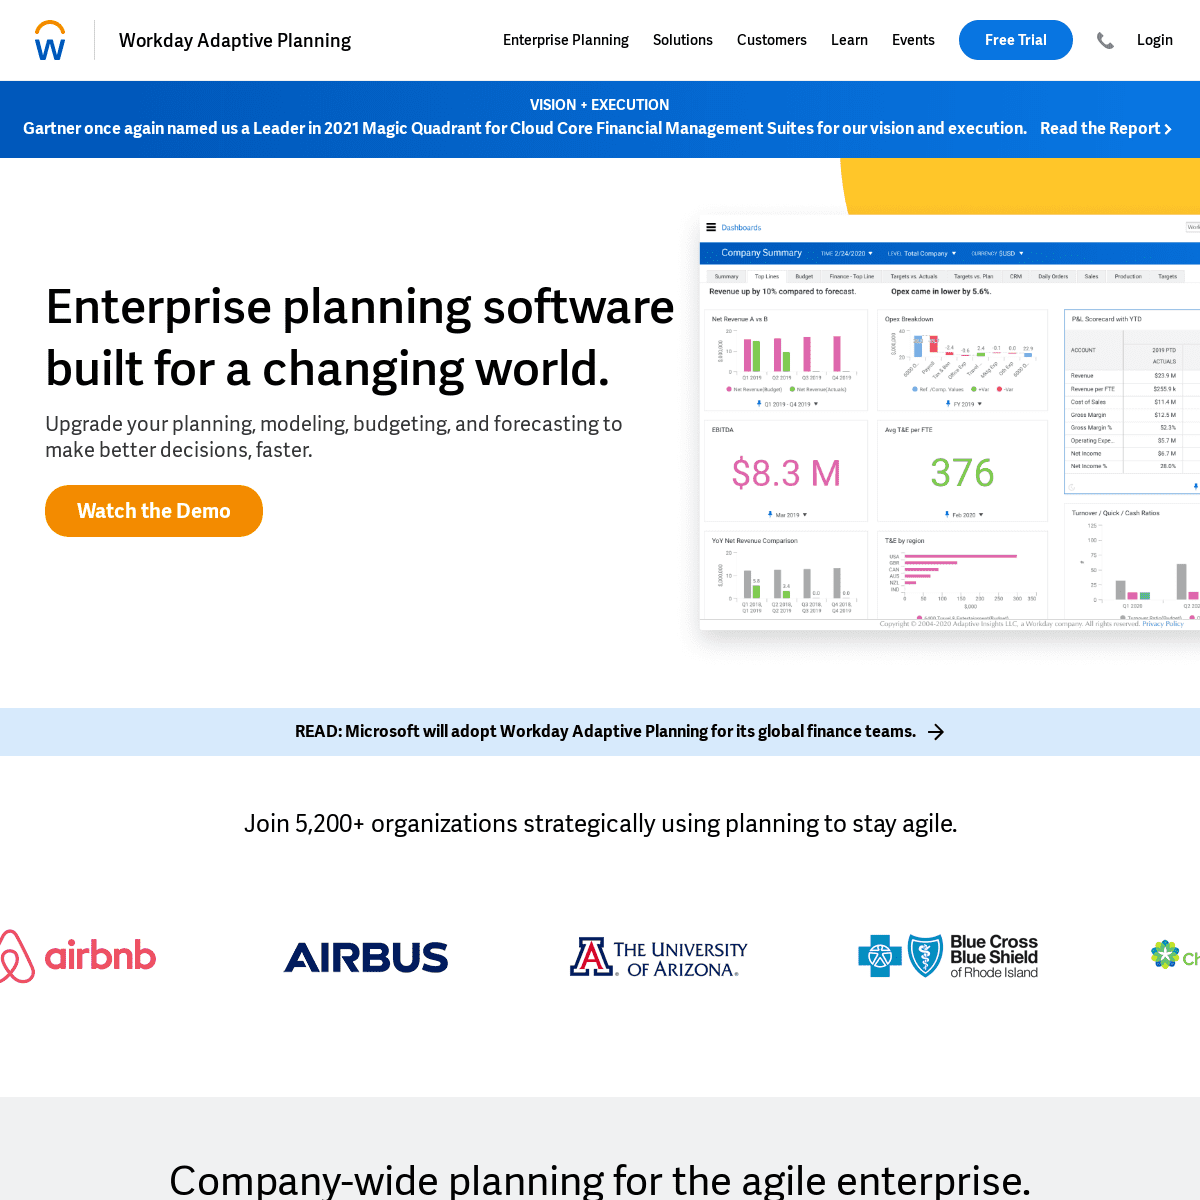 A complete backup of https://adaptiveplanning.com